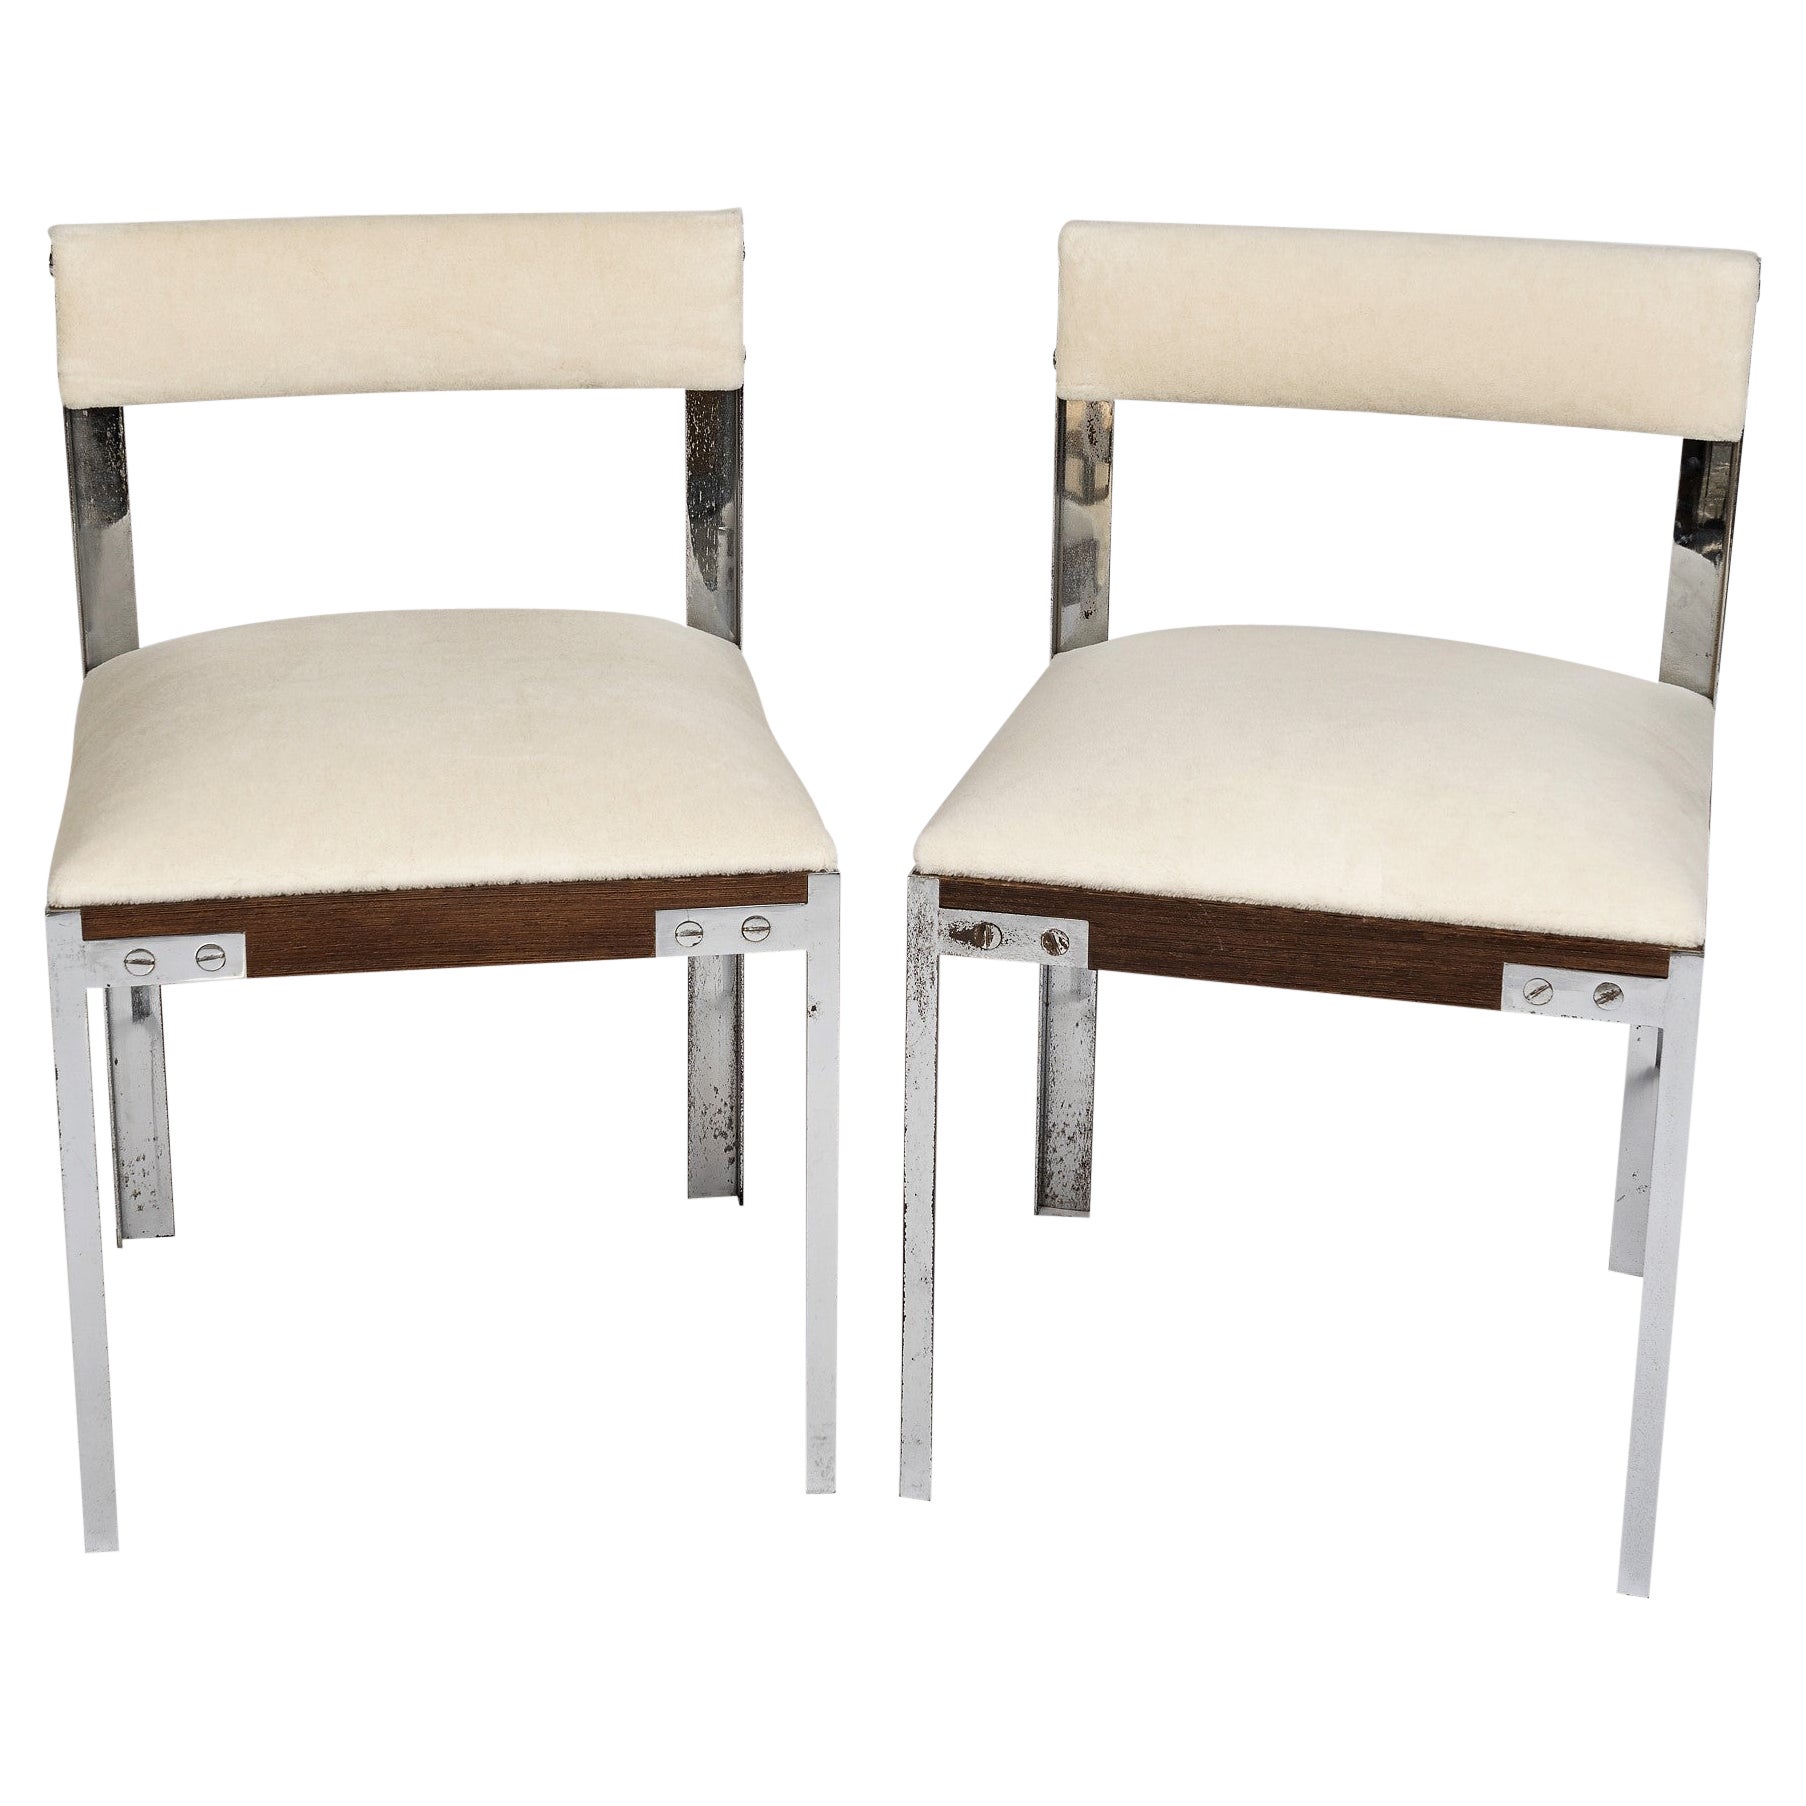 Pair of Chrome and Palmwood Chairs by Hubert Nicolas, France 1970's